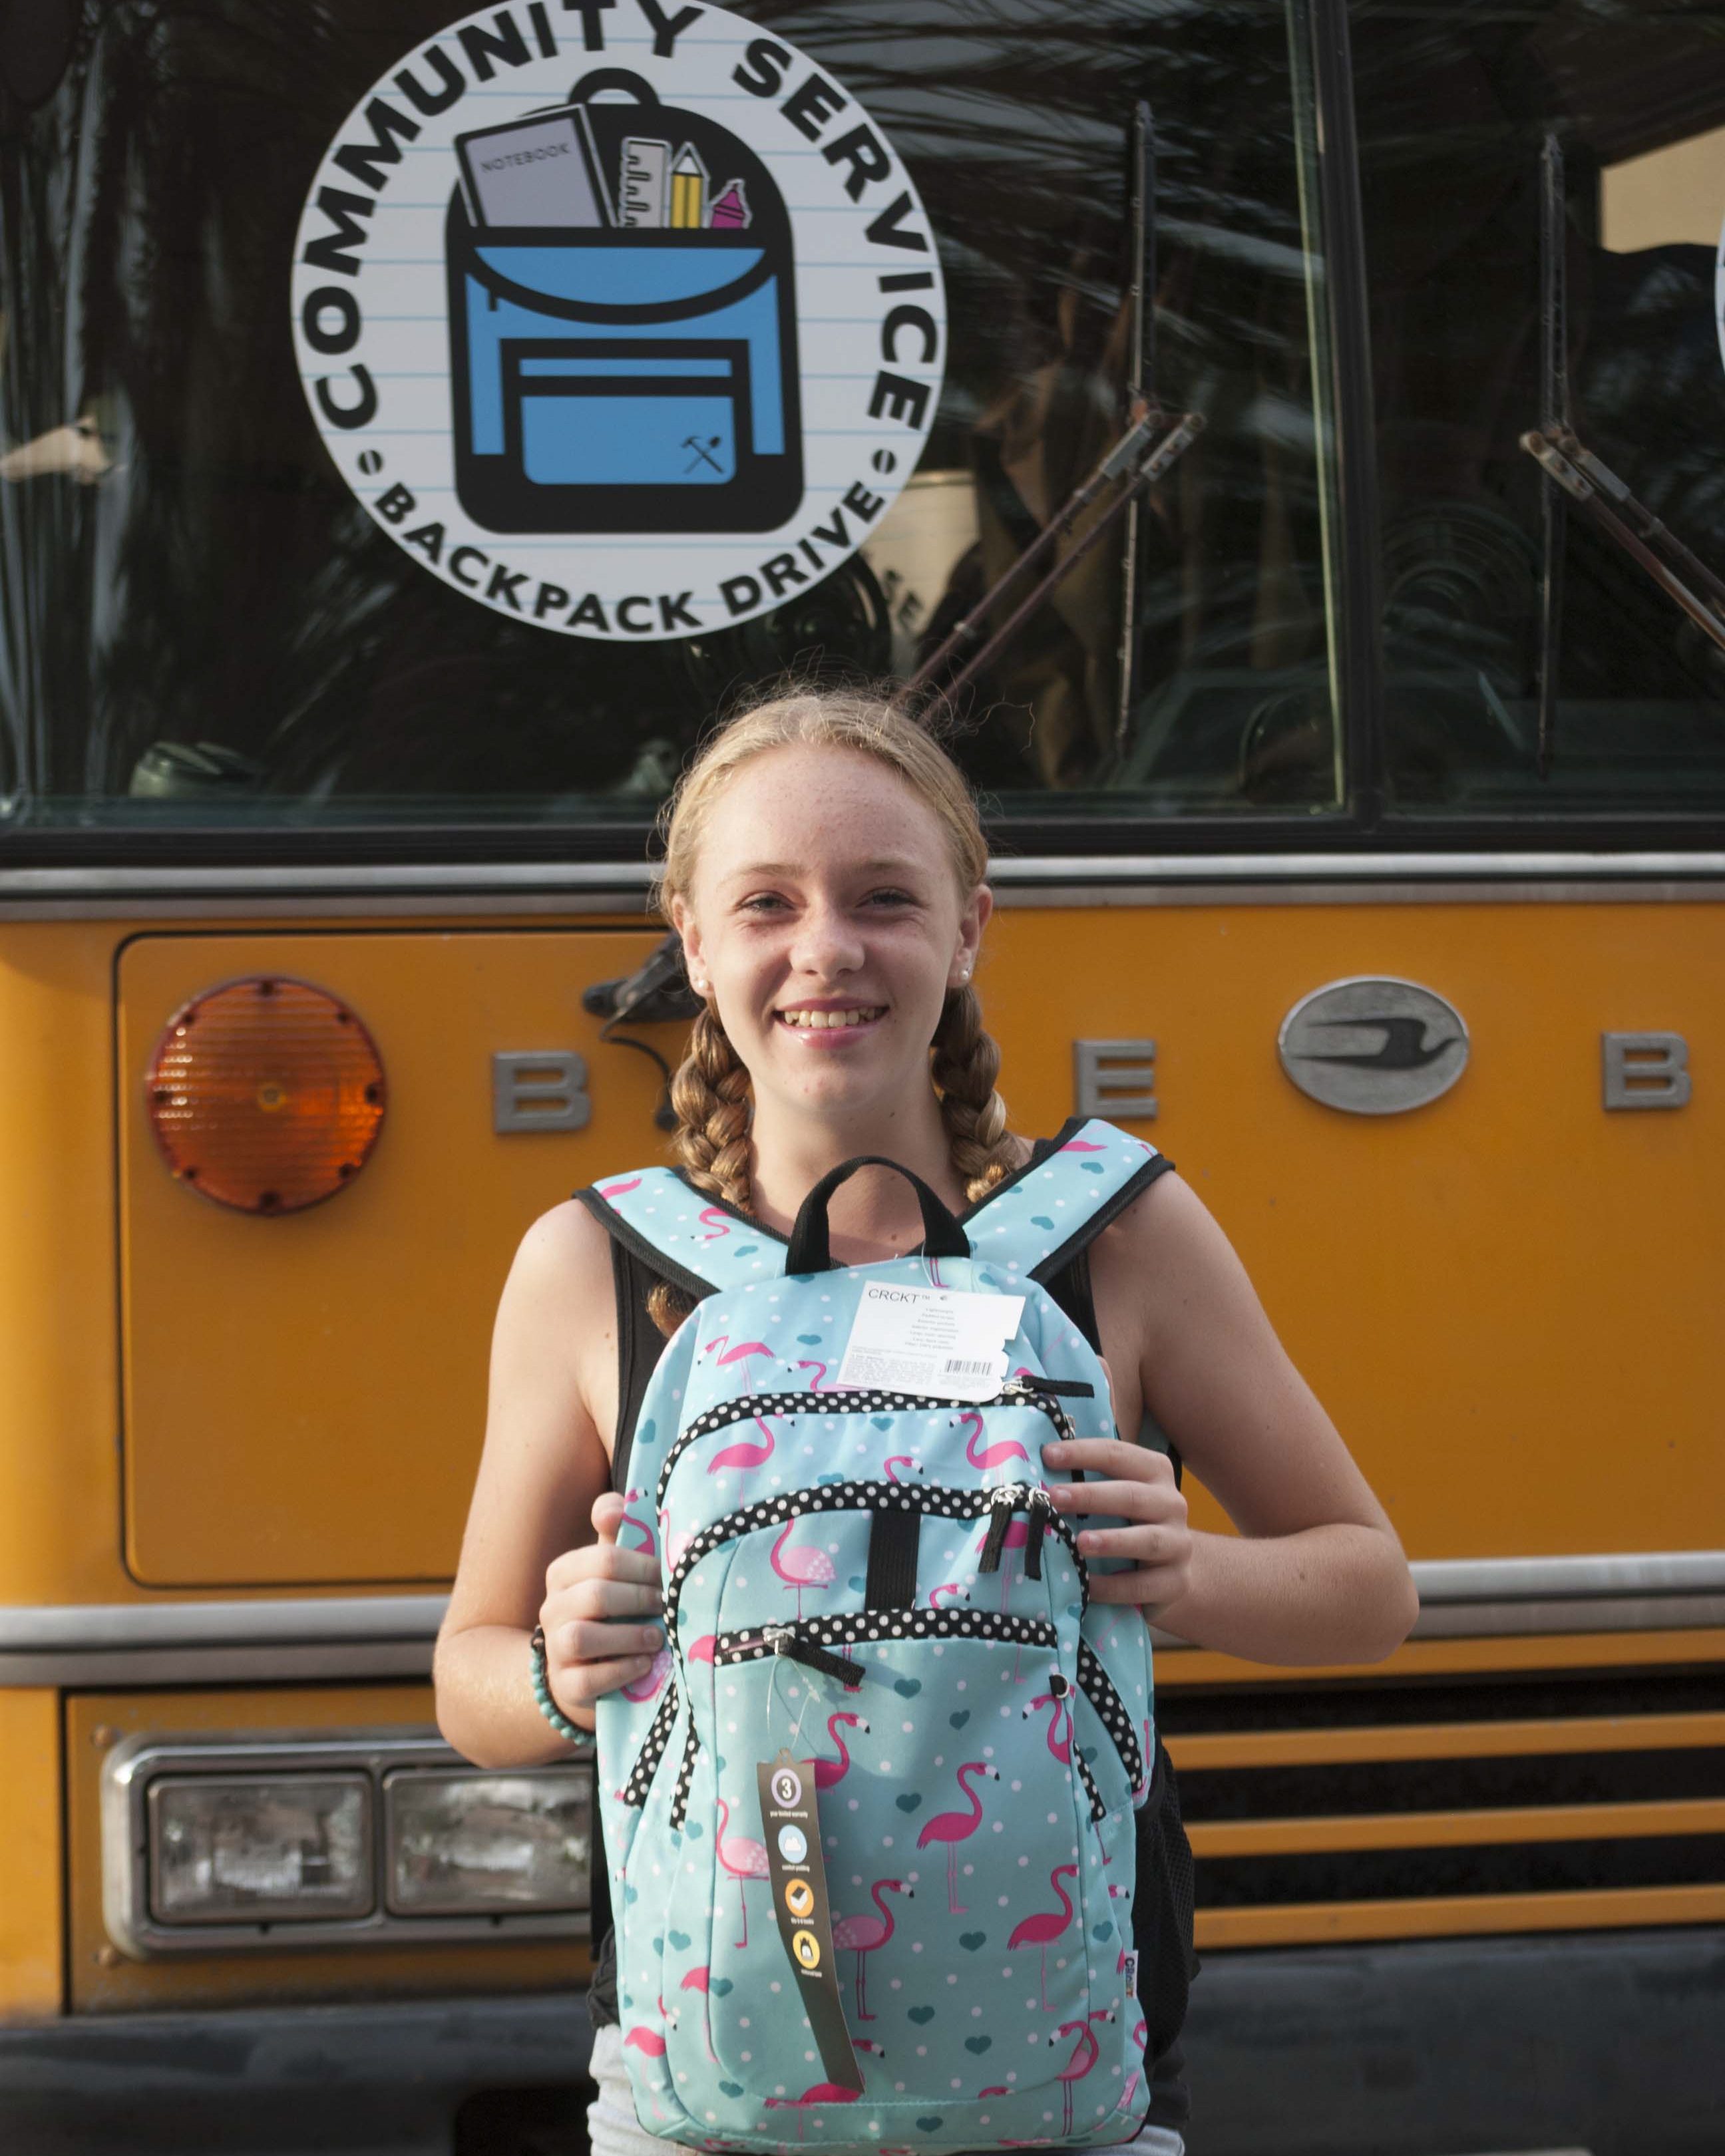 Backpack Drive - Collect & Sort Donations - Sat. 8/8 - 11:30am-2:30pm - SHIFT #2